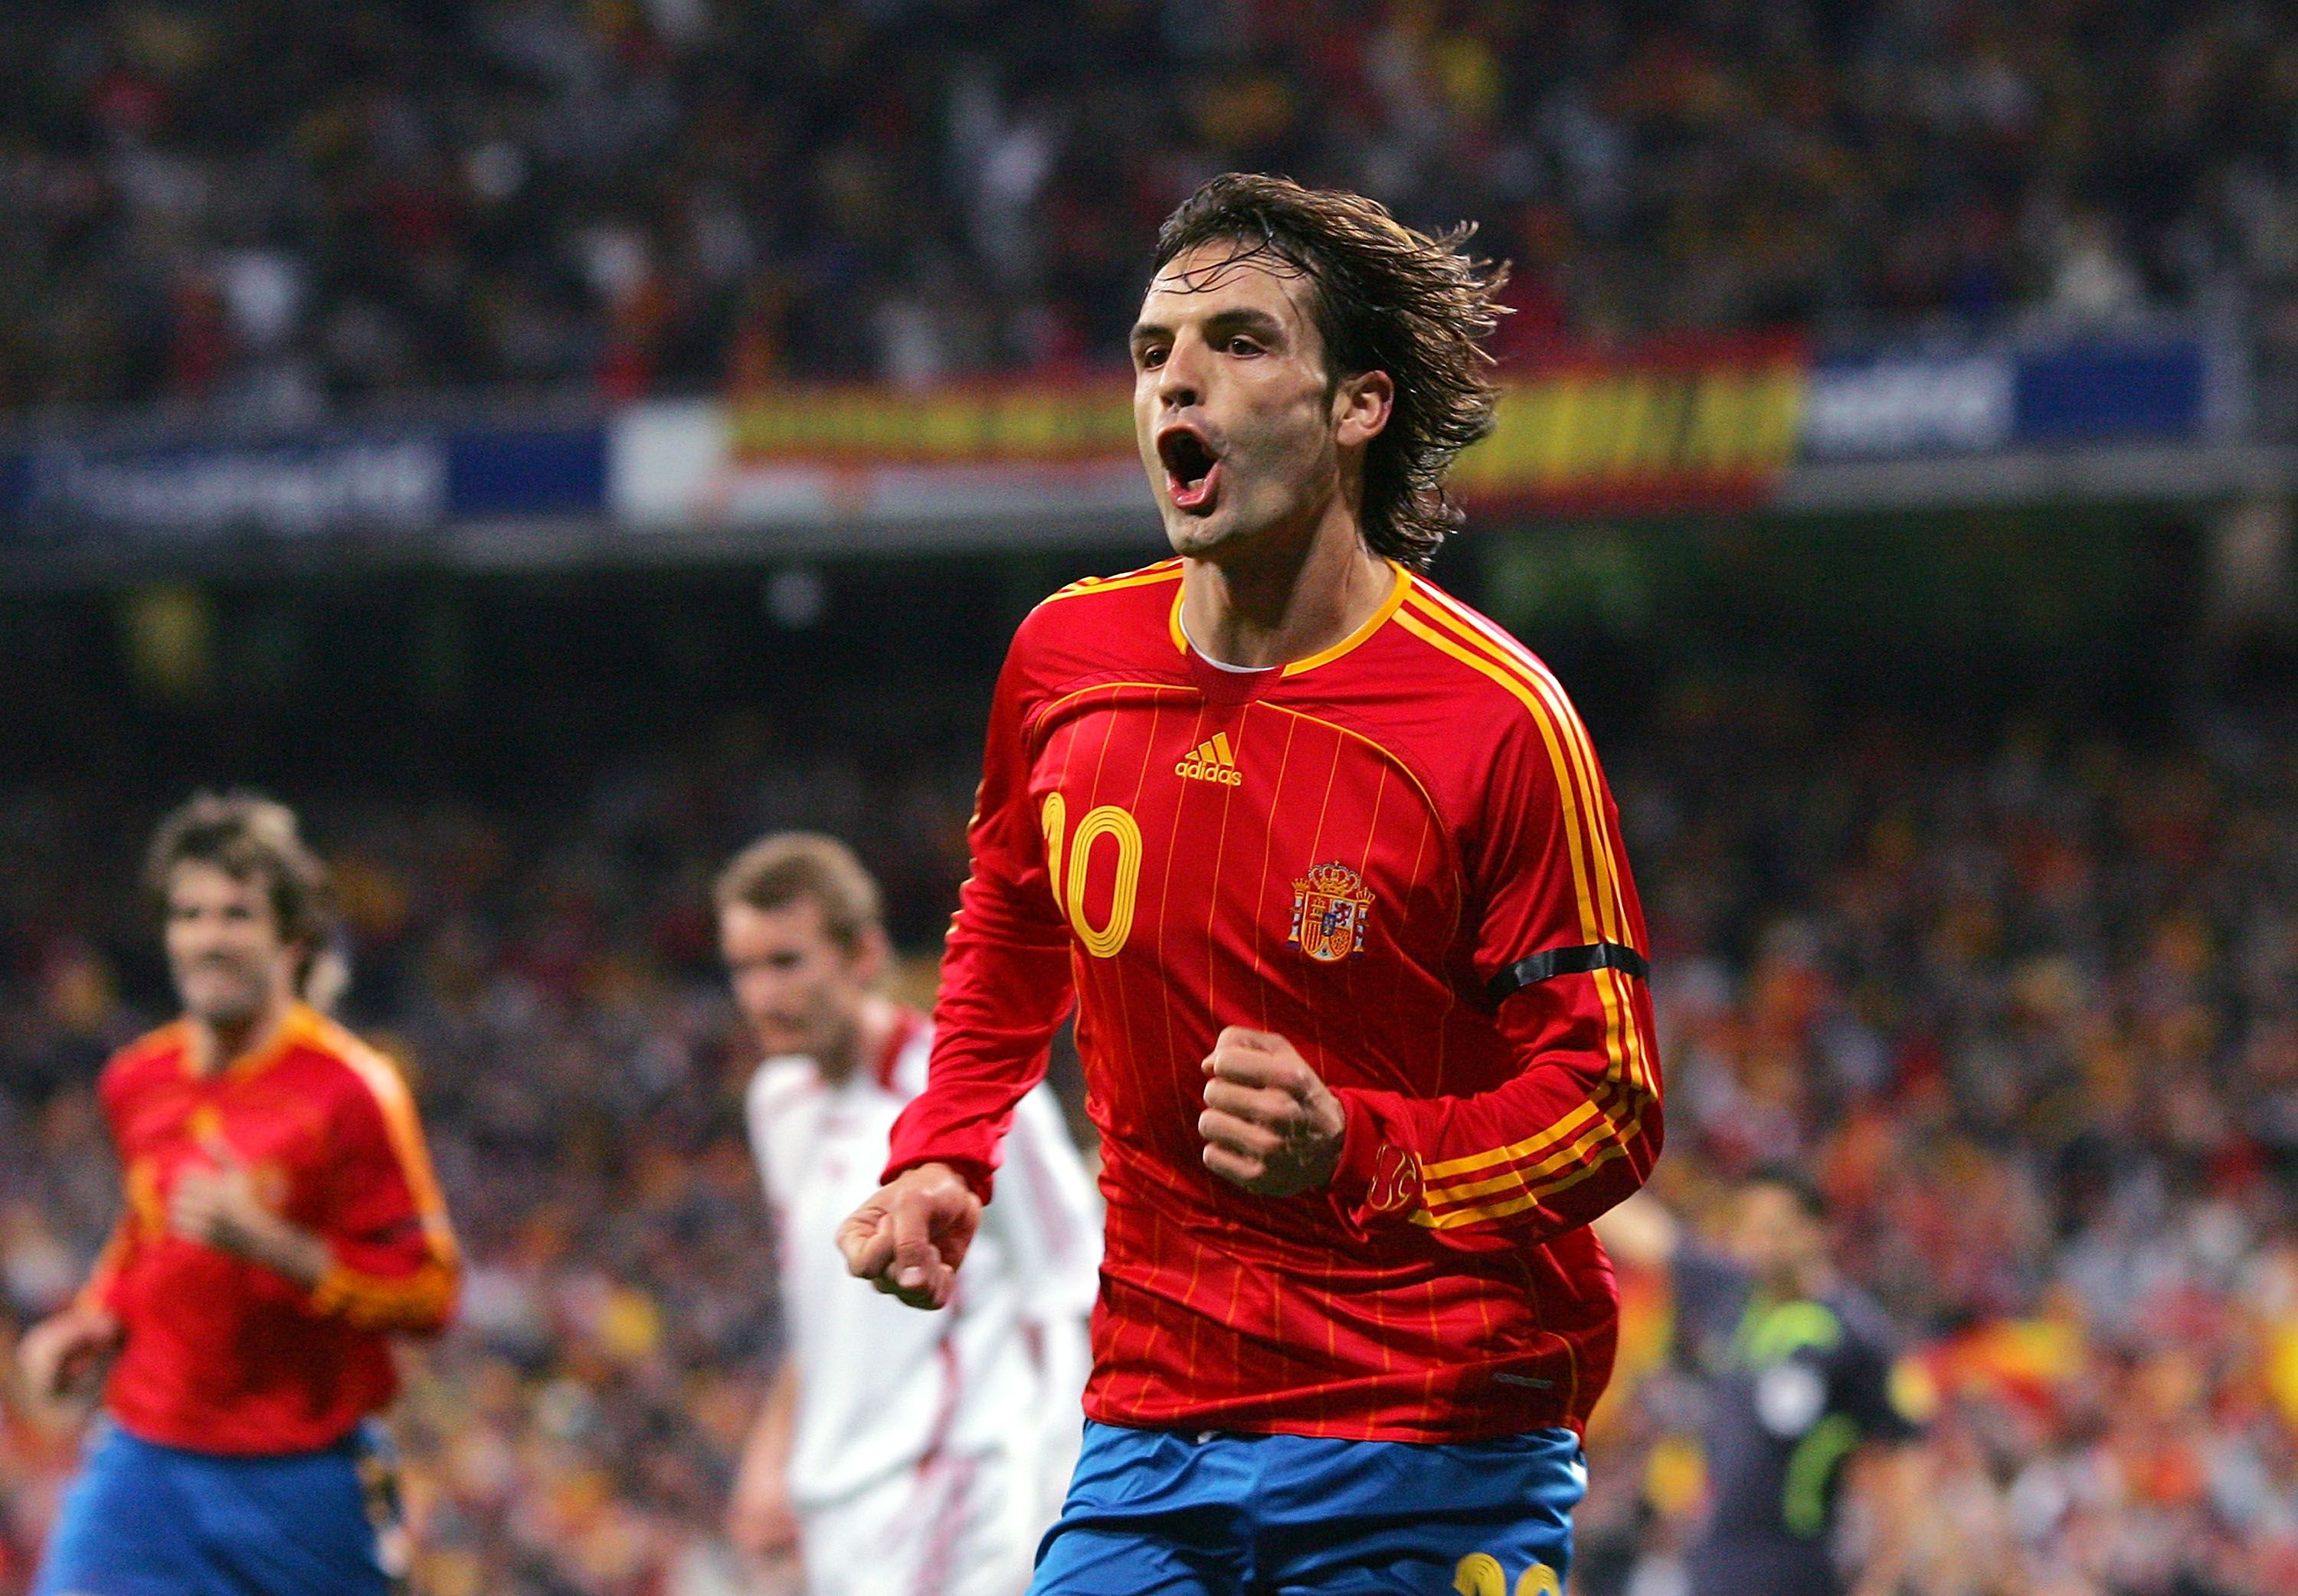 Fernando Morientes of Spain celebrates after scoring Spain's first goal at Euro 2008.